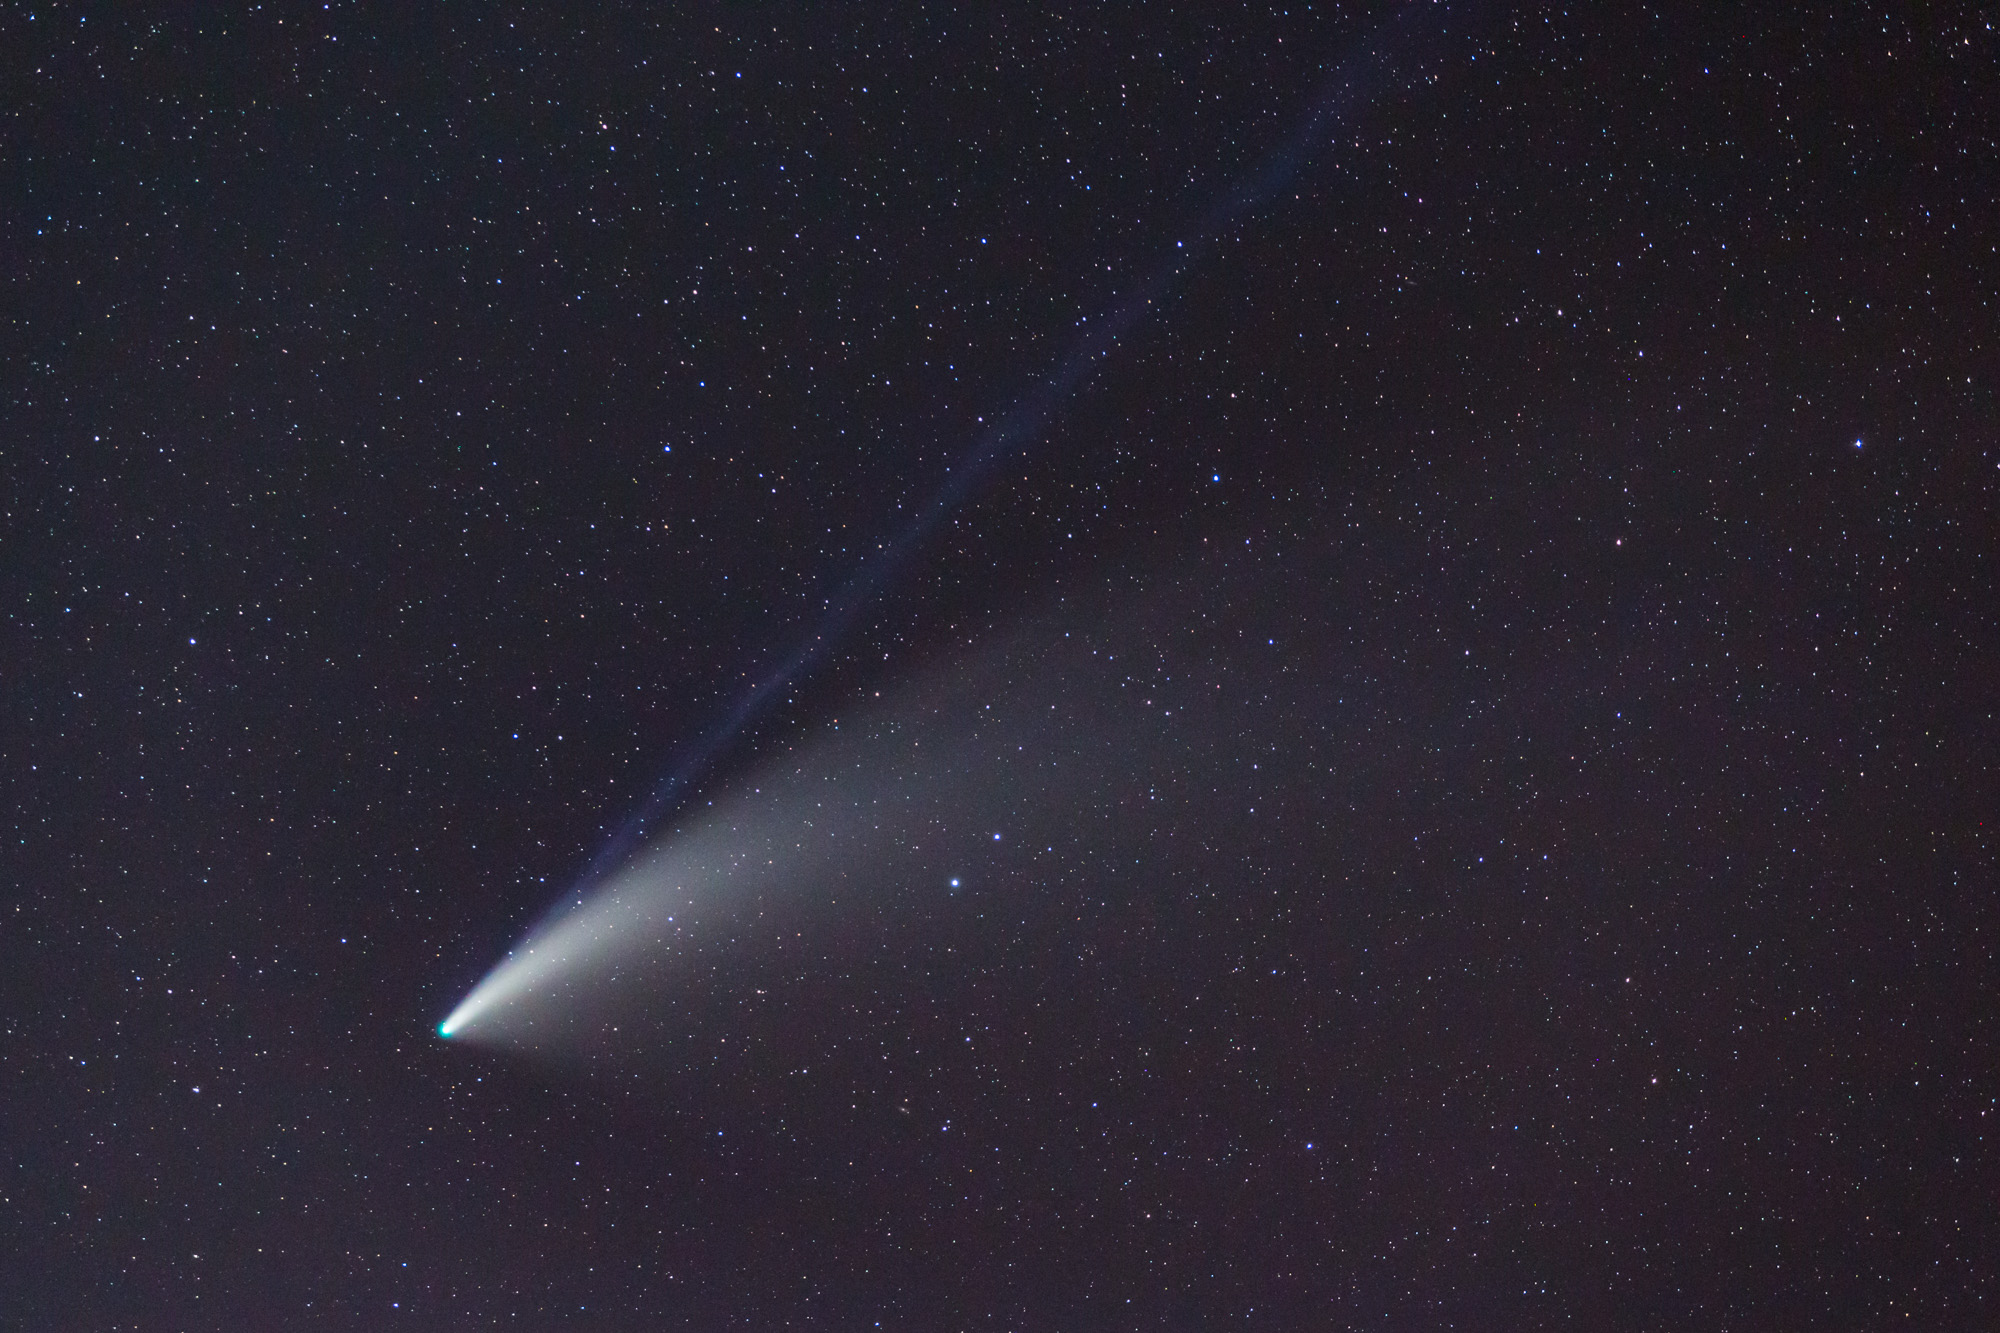 Comet NEOWISE closeup.